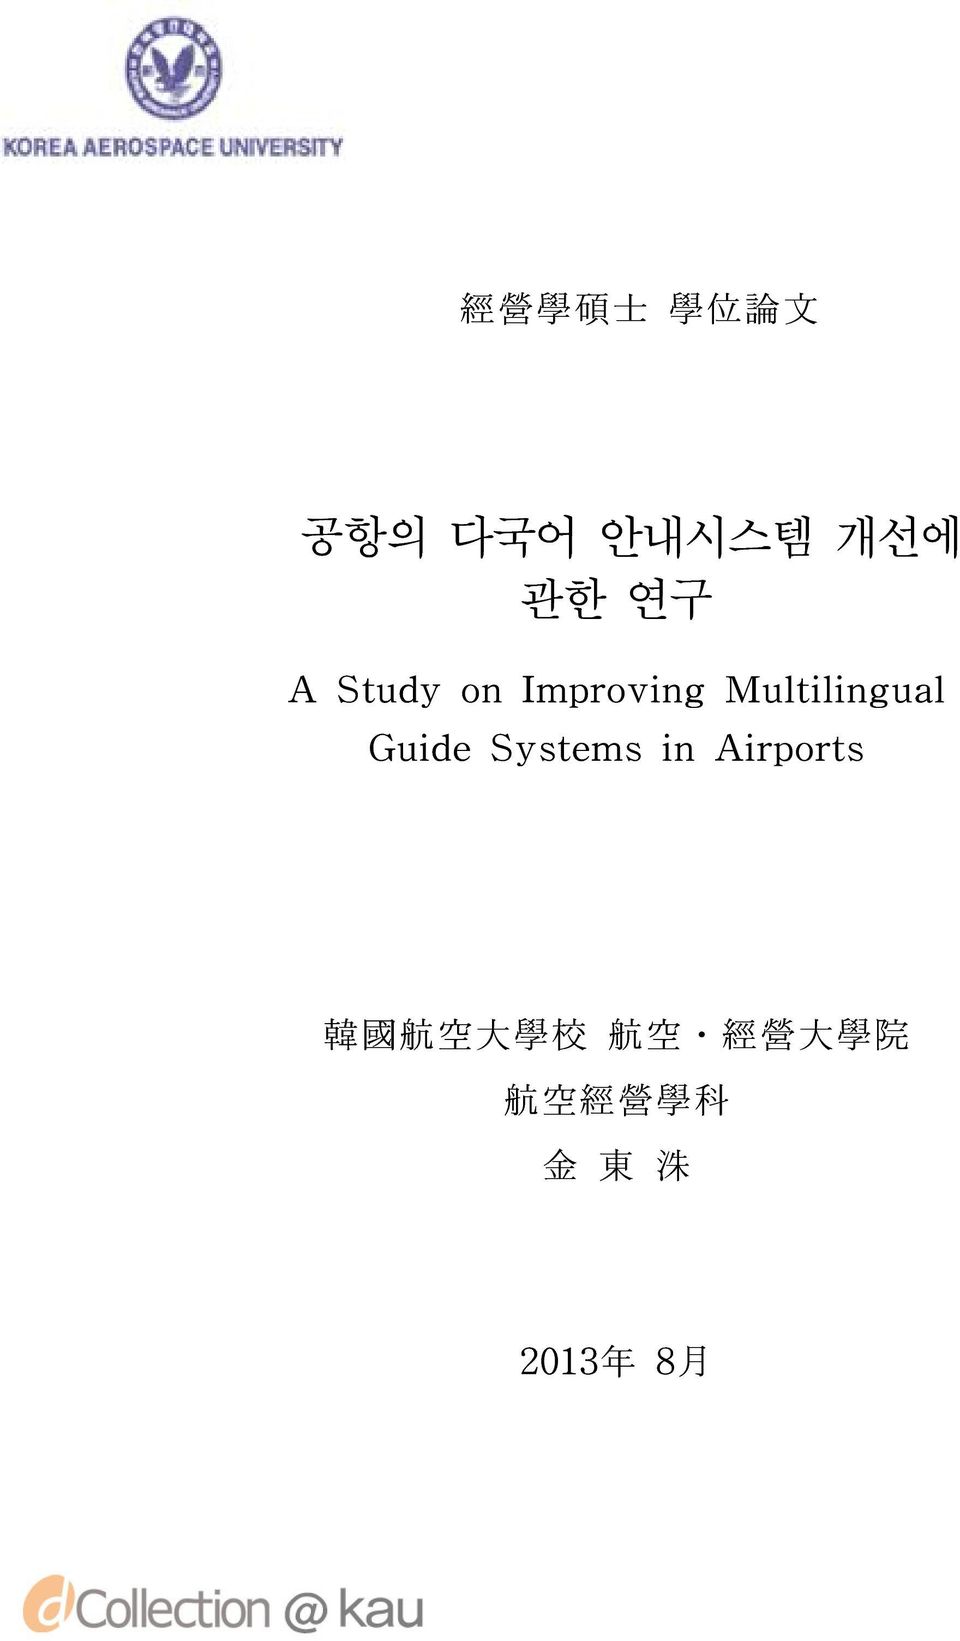 Guide Systems in Airports 韓 國 航 空 大 學 校